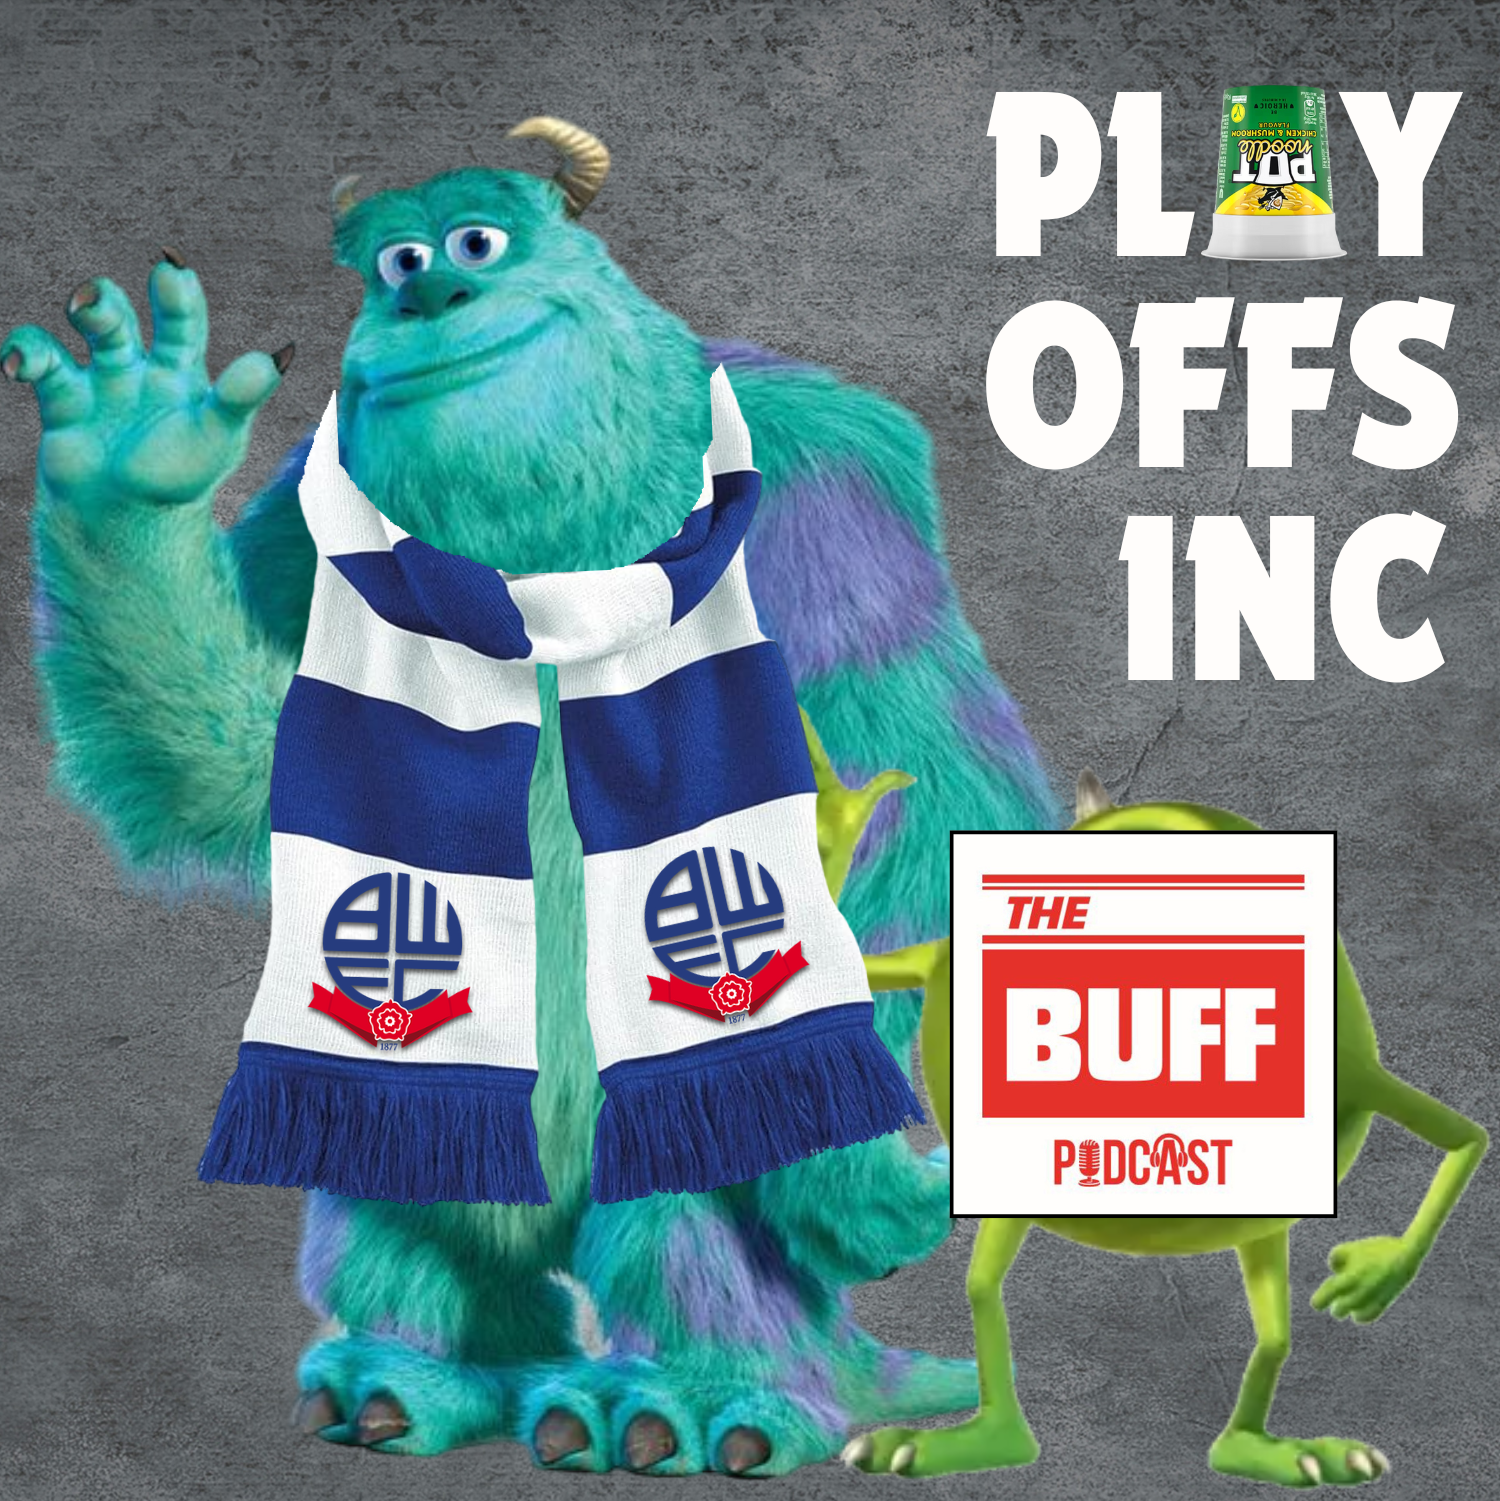 The Buff's back to Barnsley play-off semi-final special!